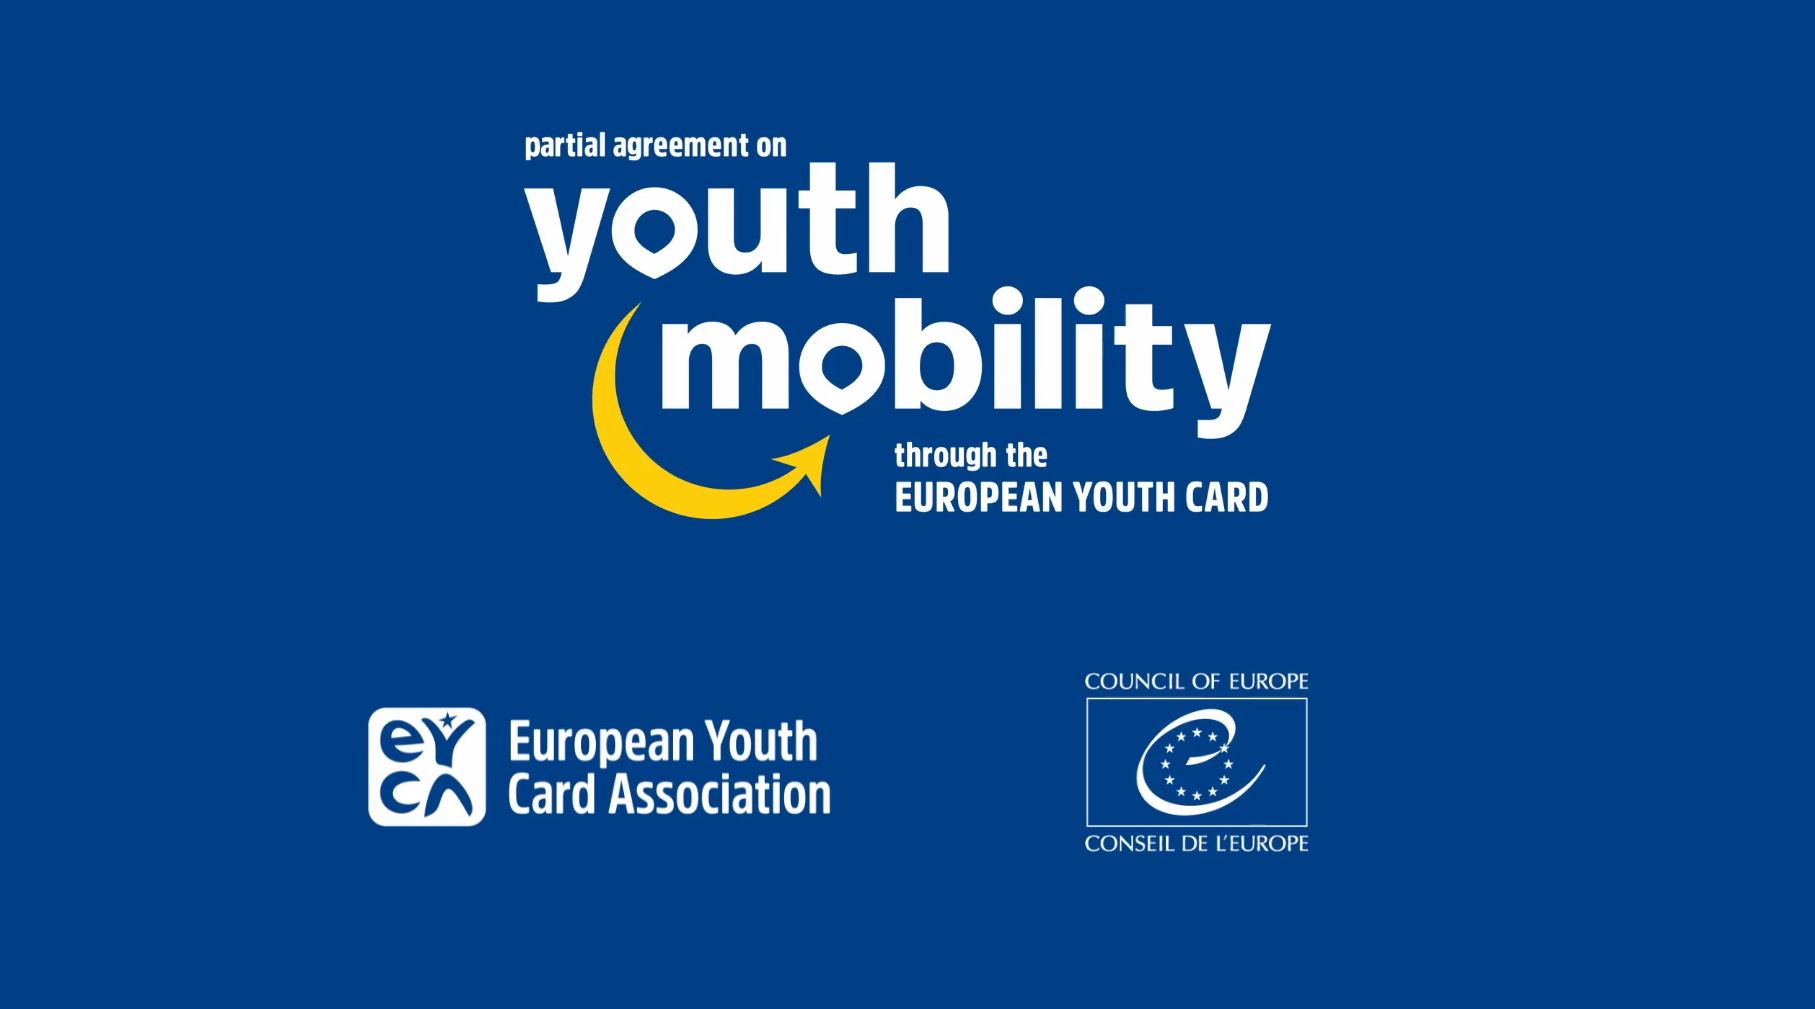 Youth mobility through the youth card